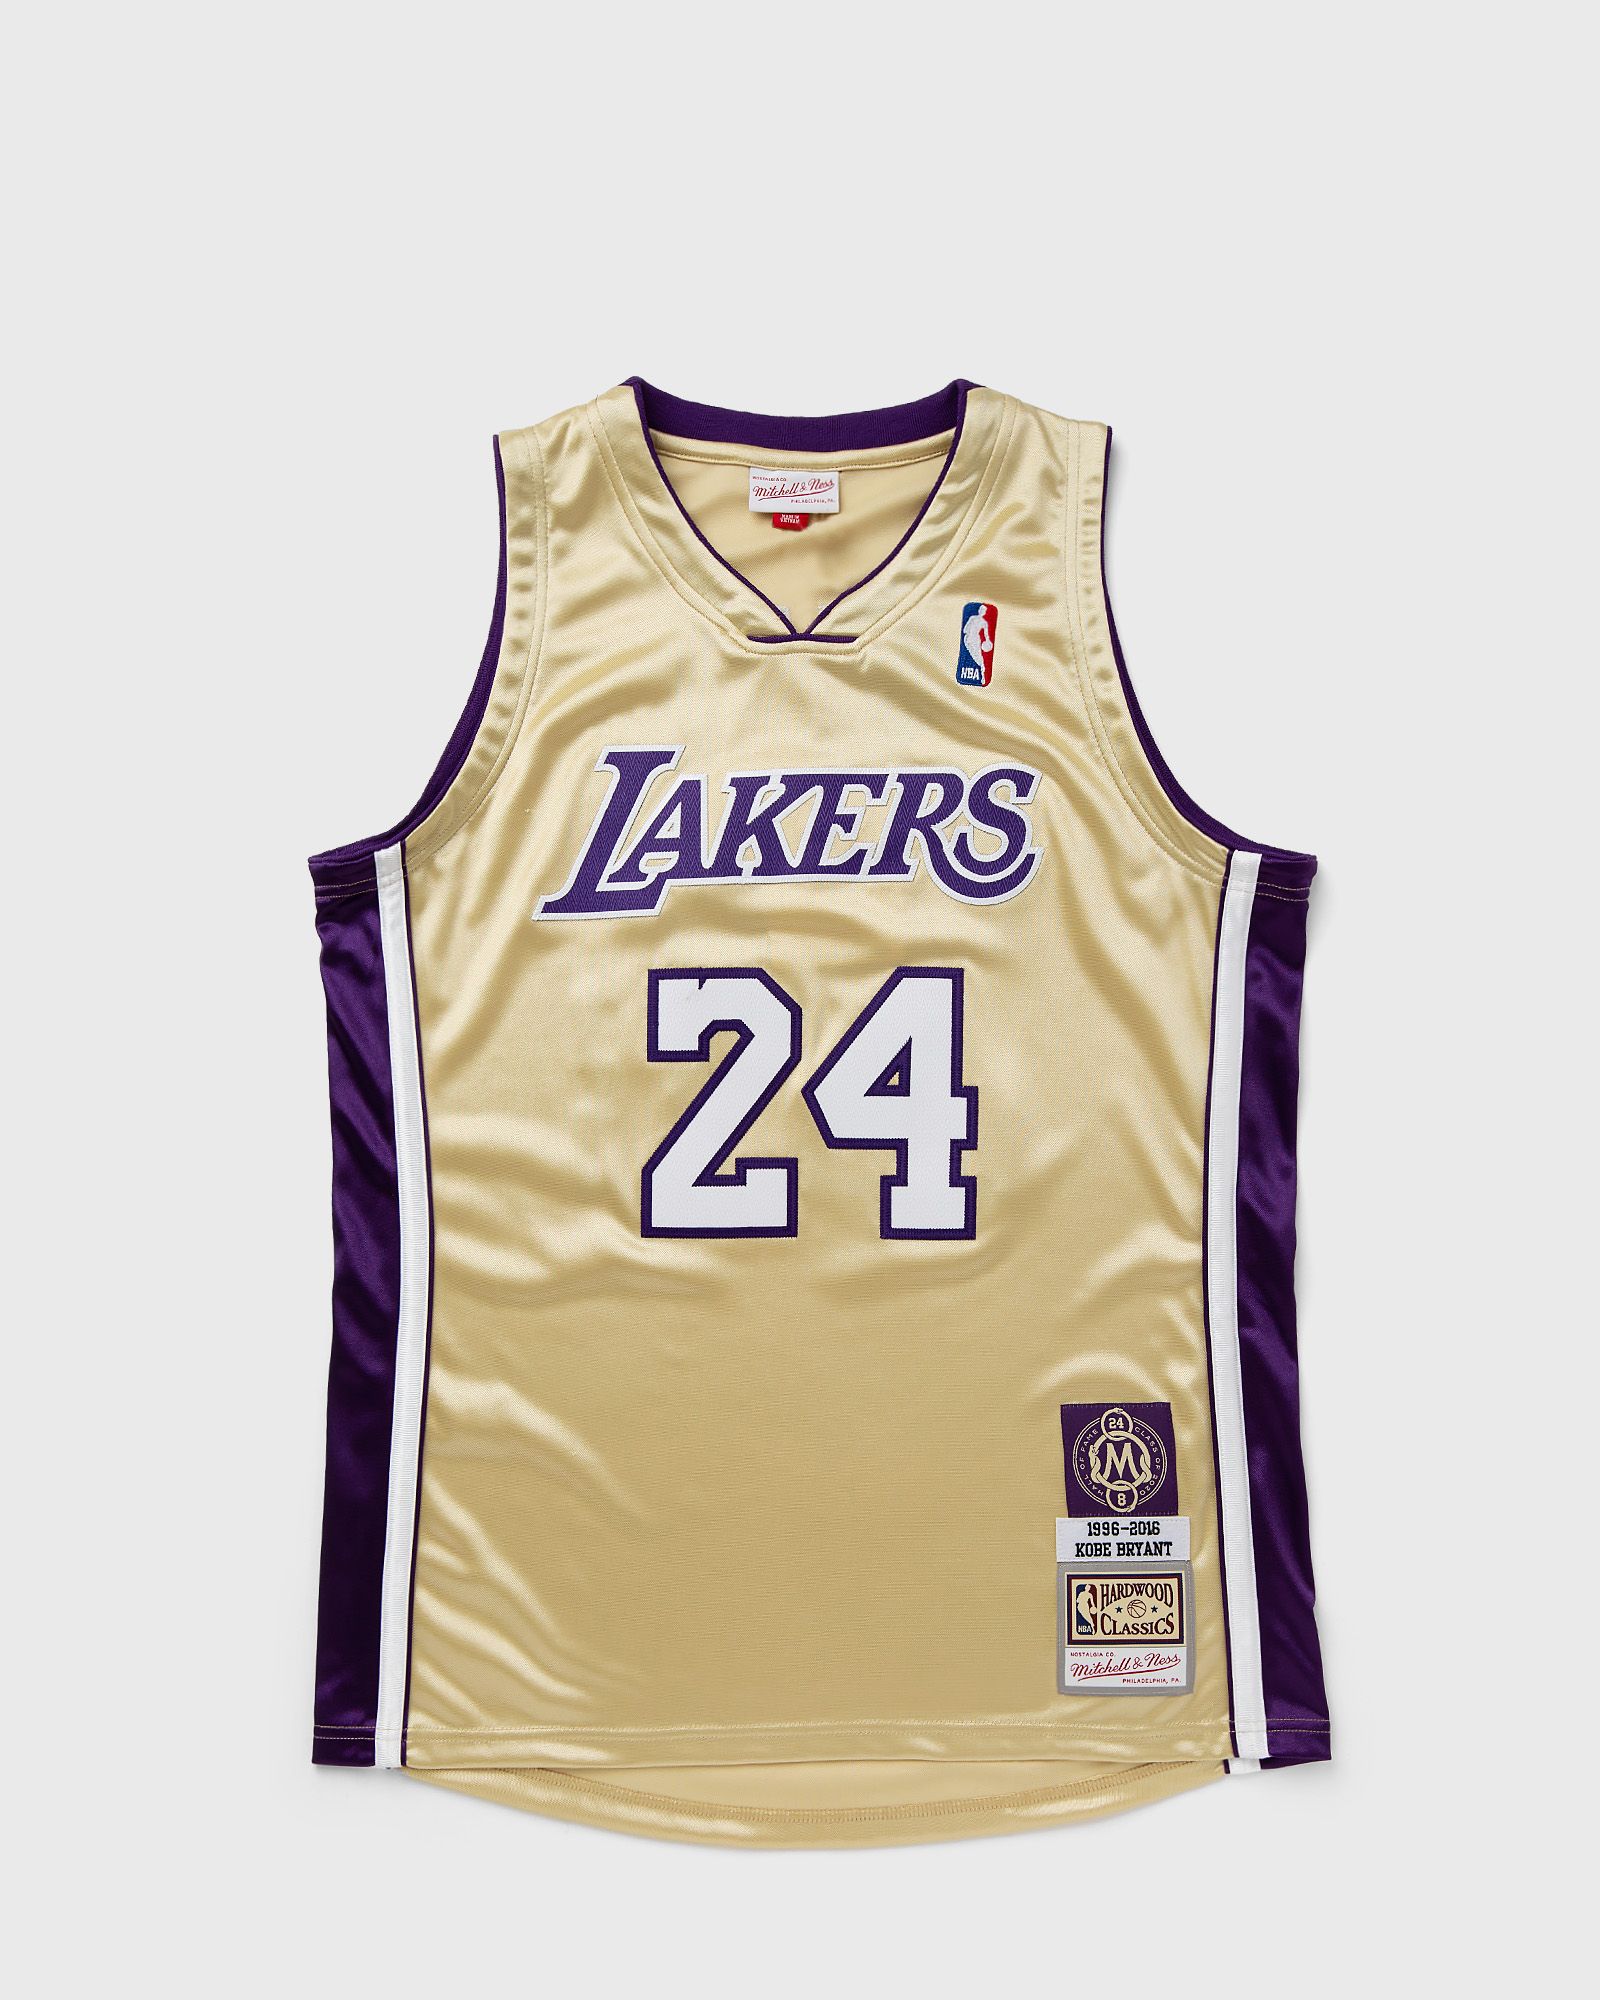 Mitchell & Ness NBA AUTHENTIC JERSEY LOS ANGELES LAKERS HALL OF FAME 1996-2016 KOBE BRYANT #24 men Jerseys gold in Größe:M von Mitchell & Ness